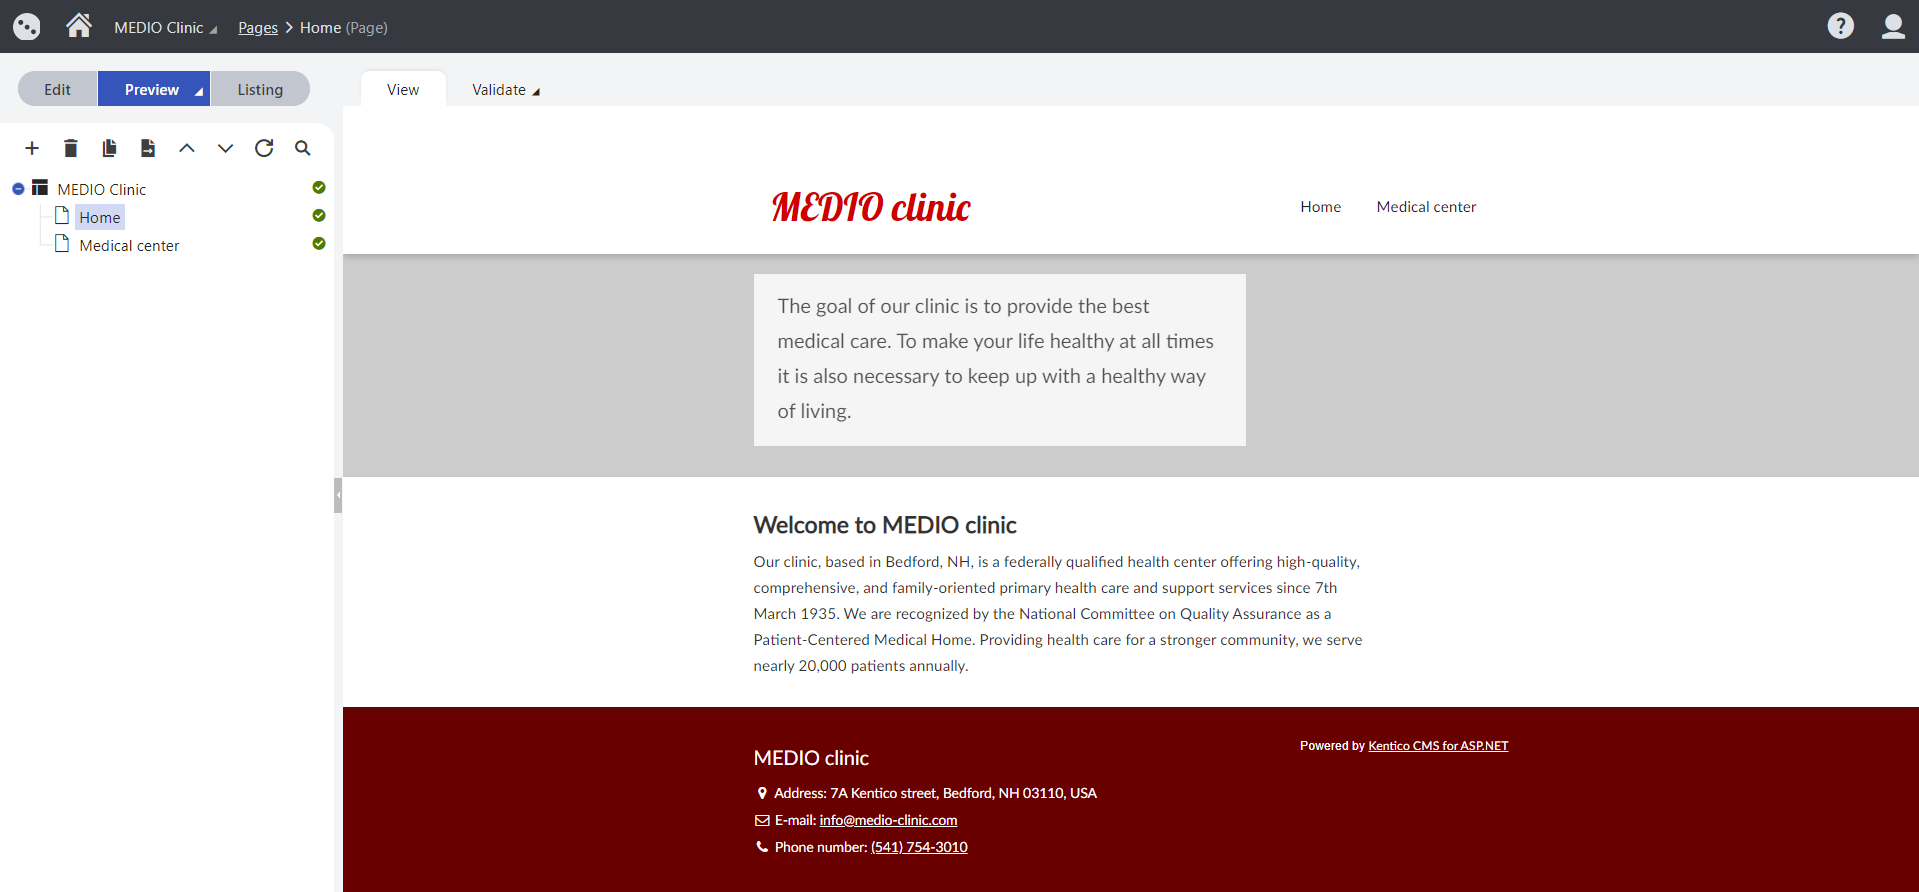 Preview of the Medio Clinic’s Home page in the administration interface